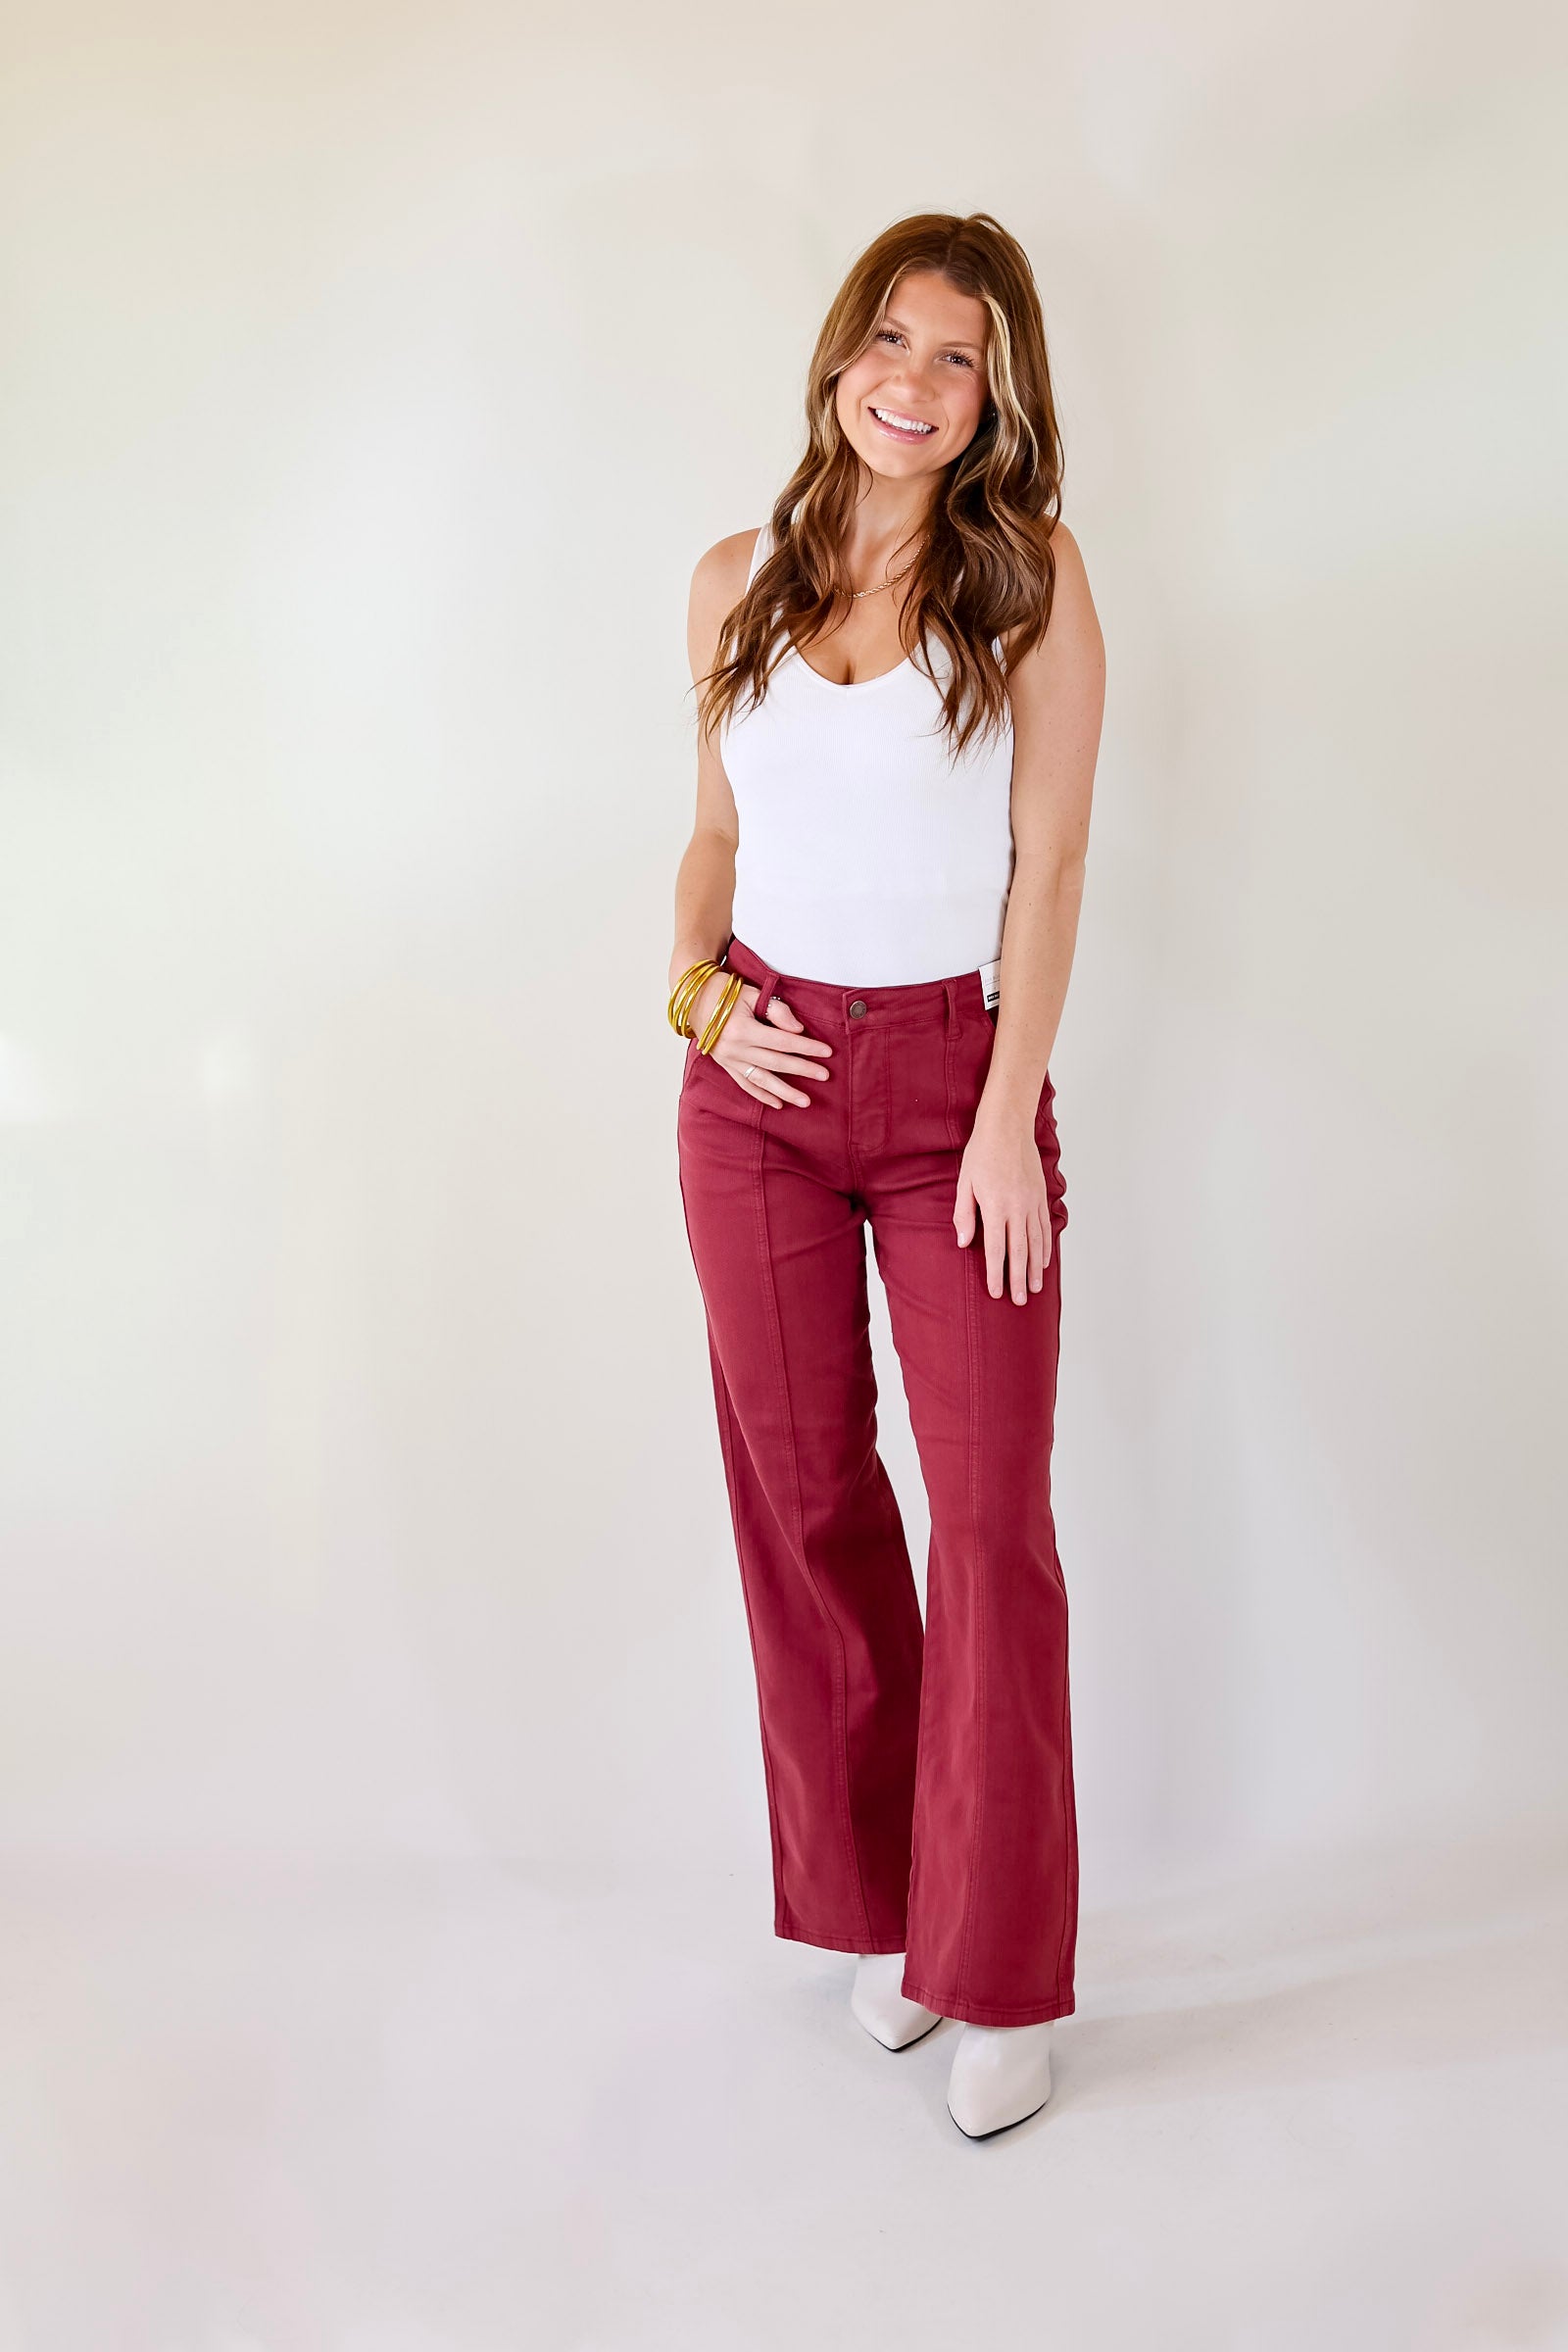 Judy Blue | Day Dreamin' Wide Leg Jeans with Front Seam in Burgundy Red - Giddy Up Glamour Boutique